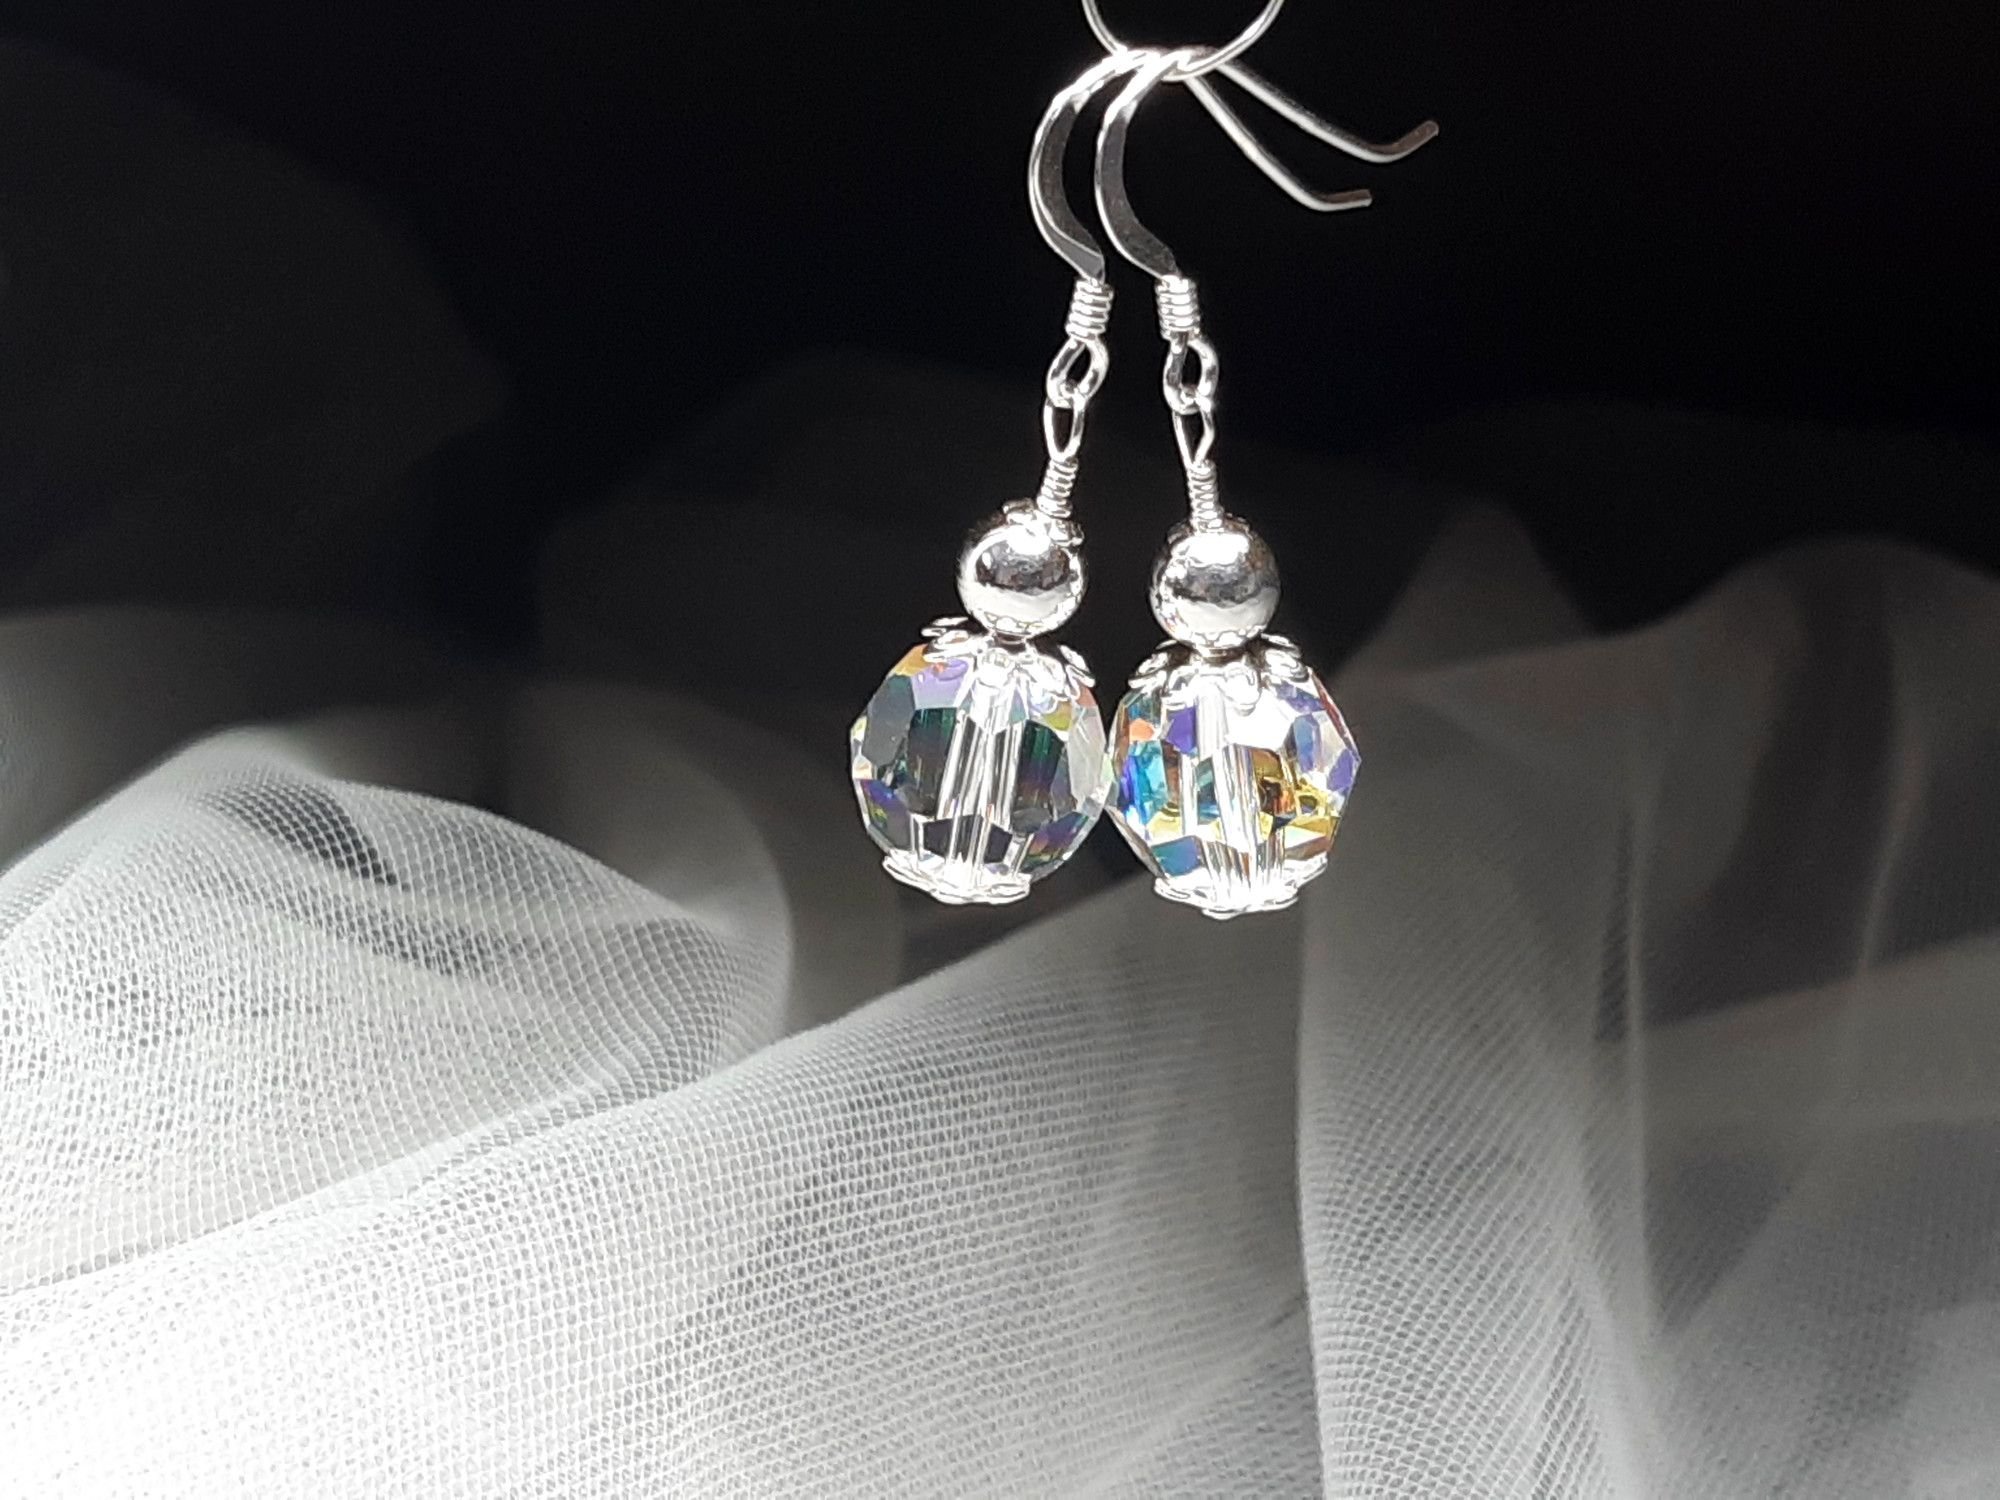 Occasion-bridal-earrings with swarovski crystal+sterling silver-14.jpg